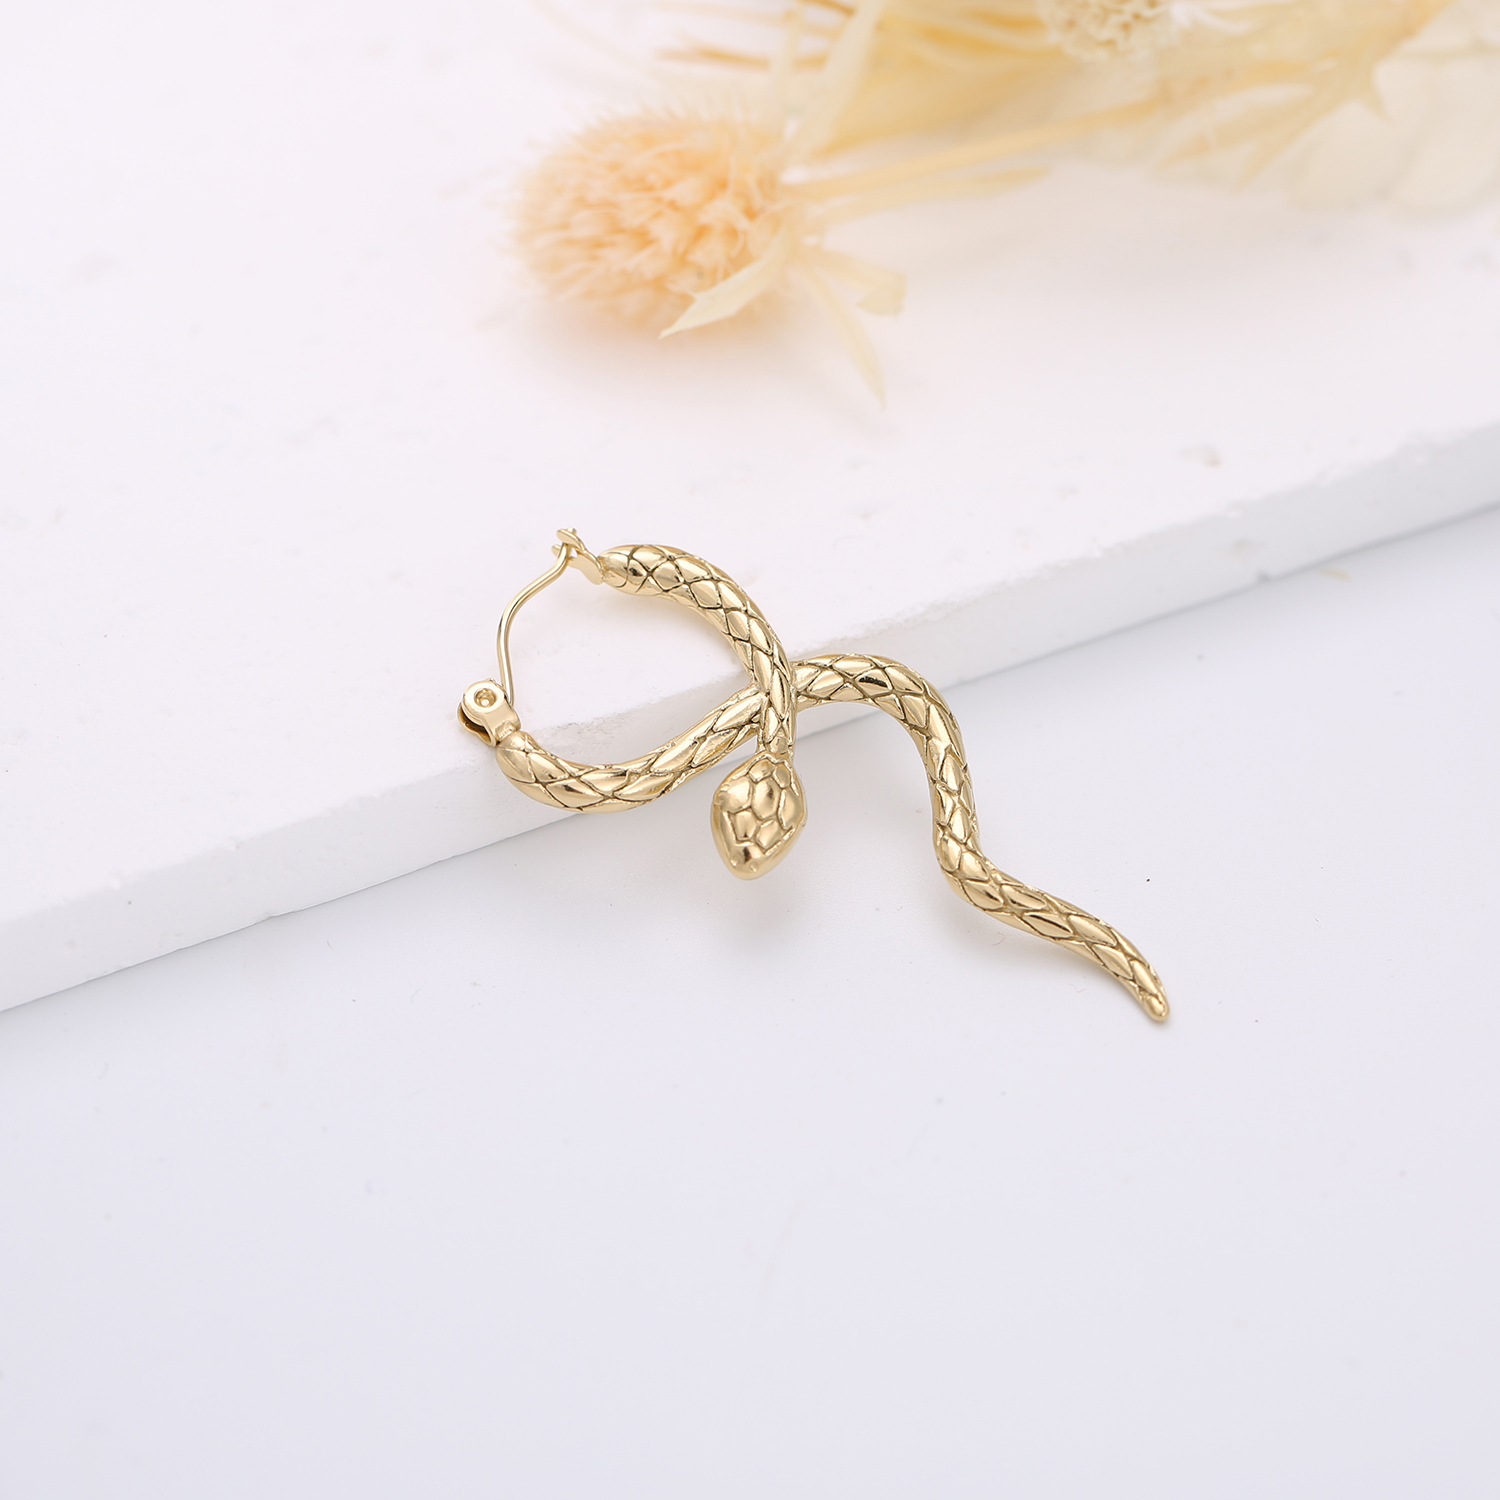 Stylish Unique Stainless Steel Snake Unusual Hoop Earrings Statement Pvd Gold Color Texture Waterproof Charm Jewelry